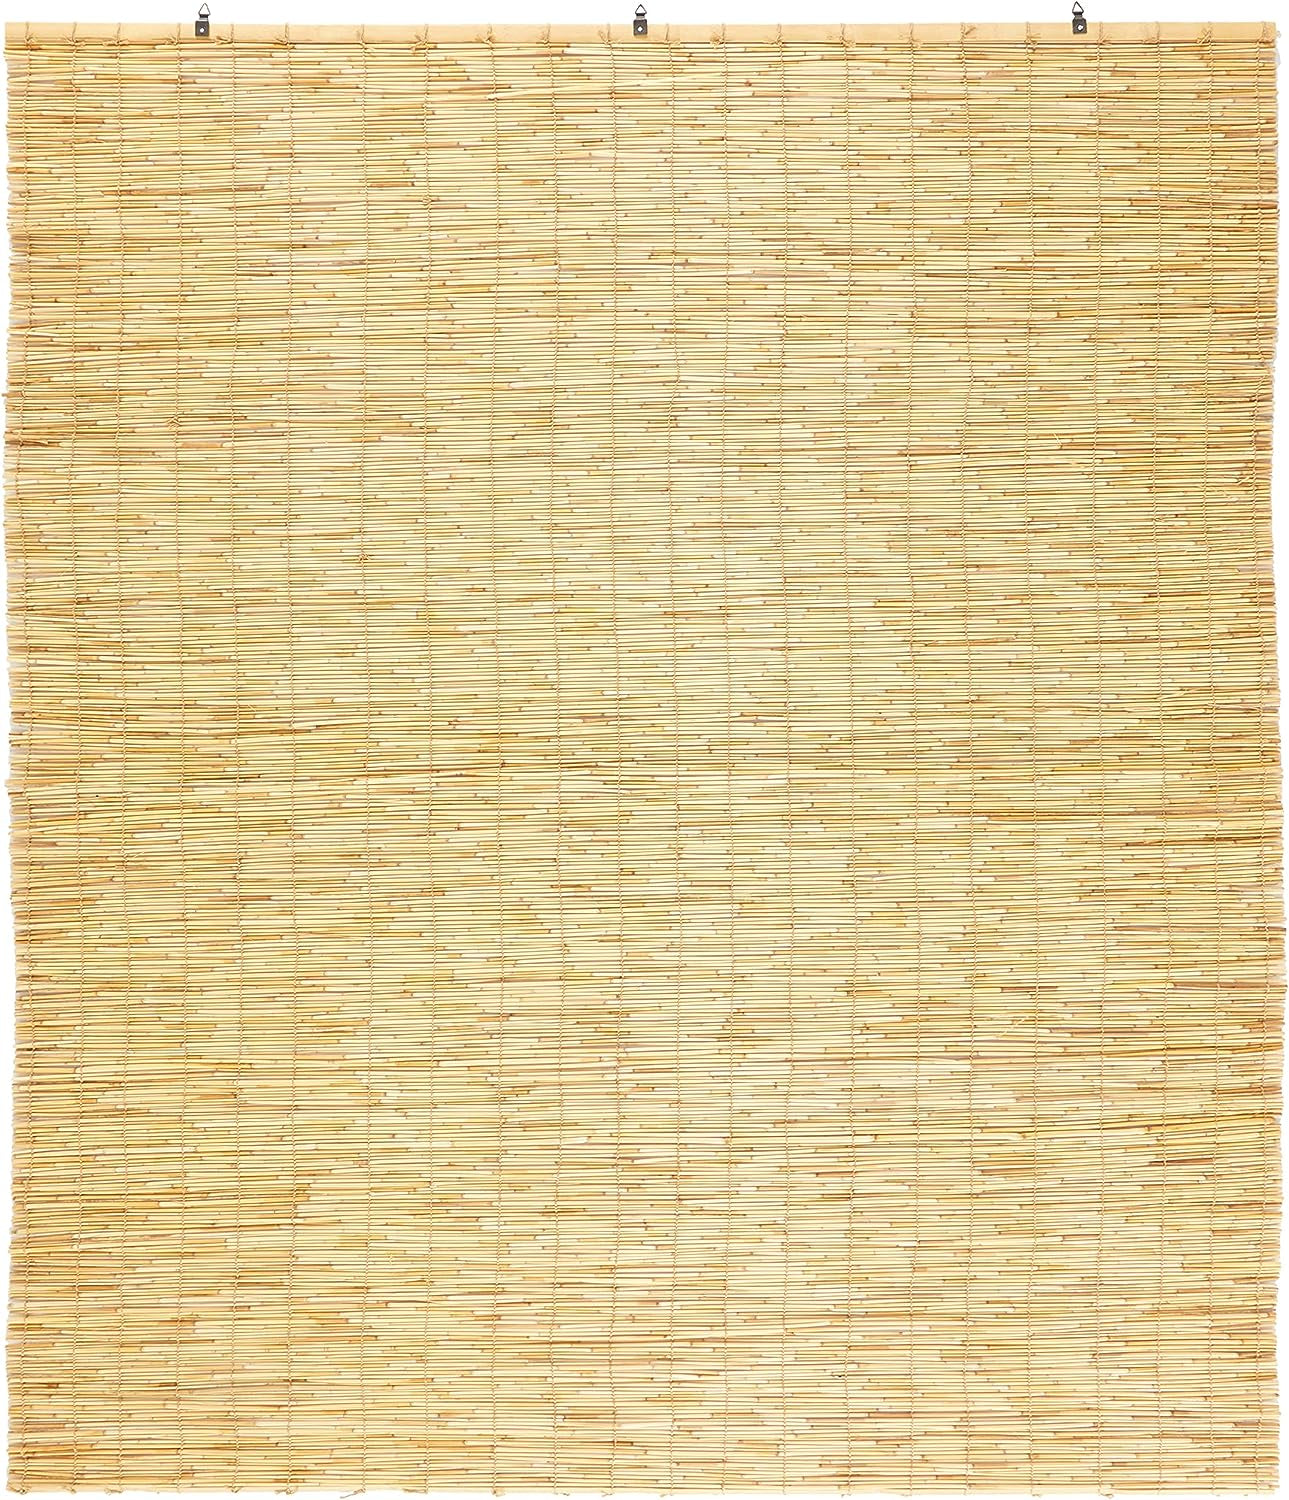 Backyard X-Scapes Light-Filtering Cord-Free Bamboo Reed Roll-Up Blind Shades for Windows Manual Roman Blinds Coffee 48 in W X 72 in H